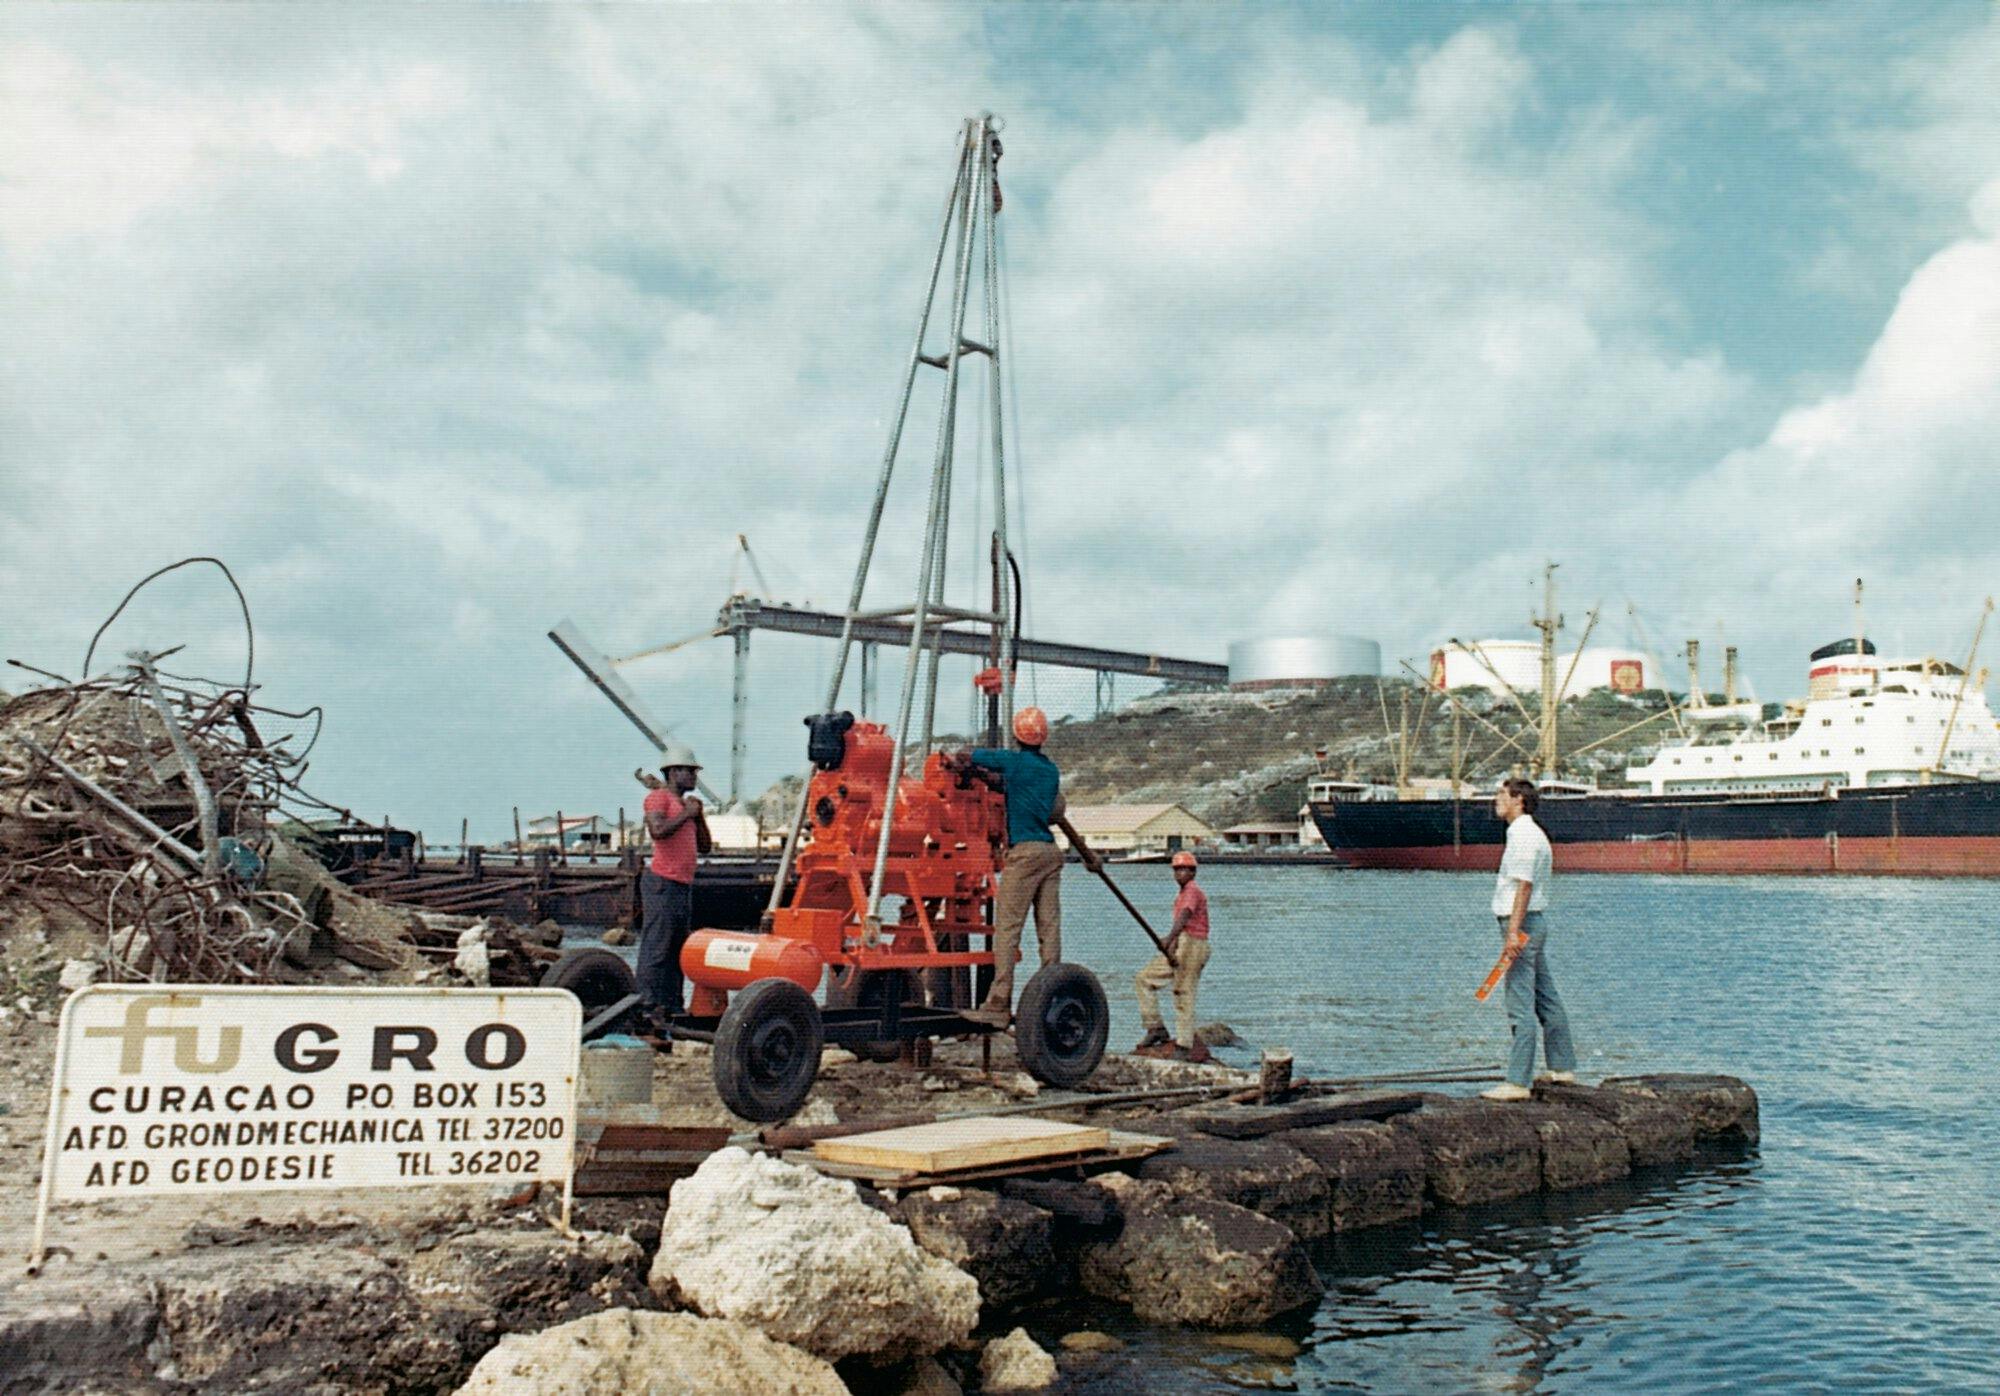 Fugro in Curacao. Foreman Kloos Kooi on the right.
Images from Fugro 40 year anniversary book page 63
Images from Fugro 50 year anniversary book page 43